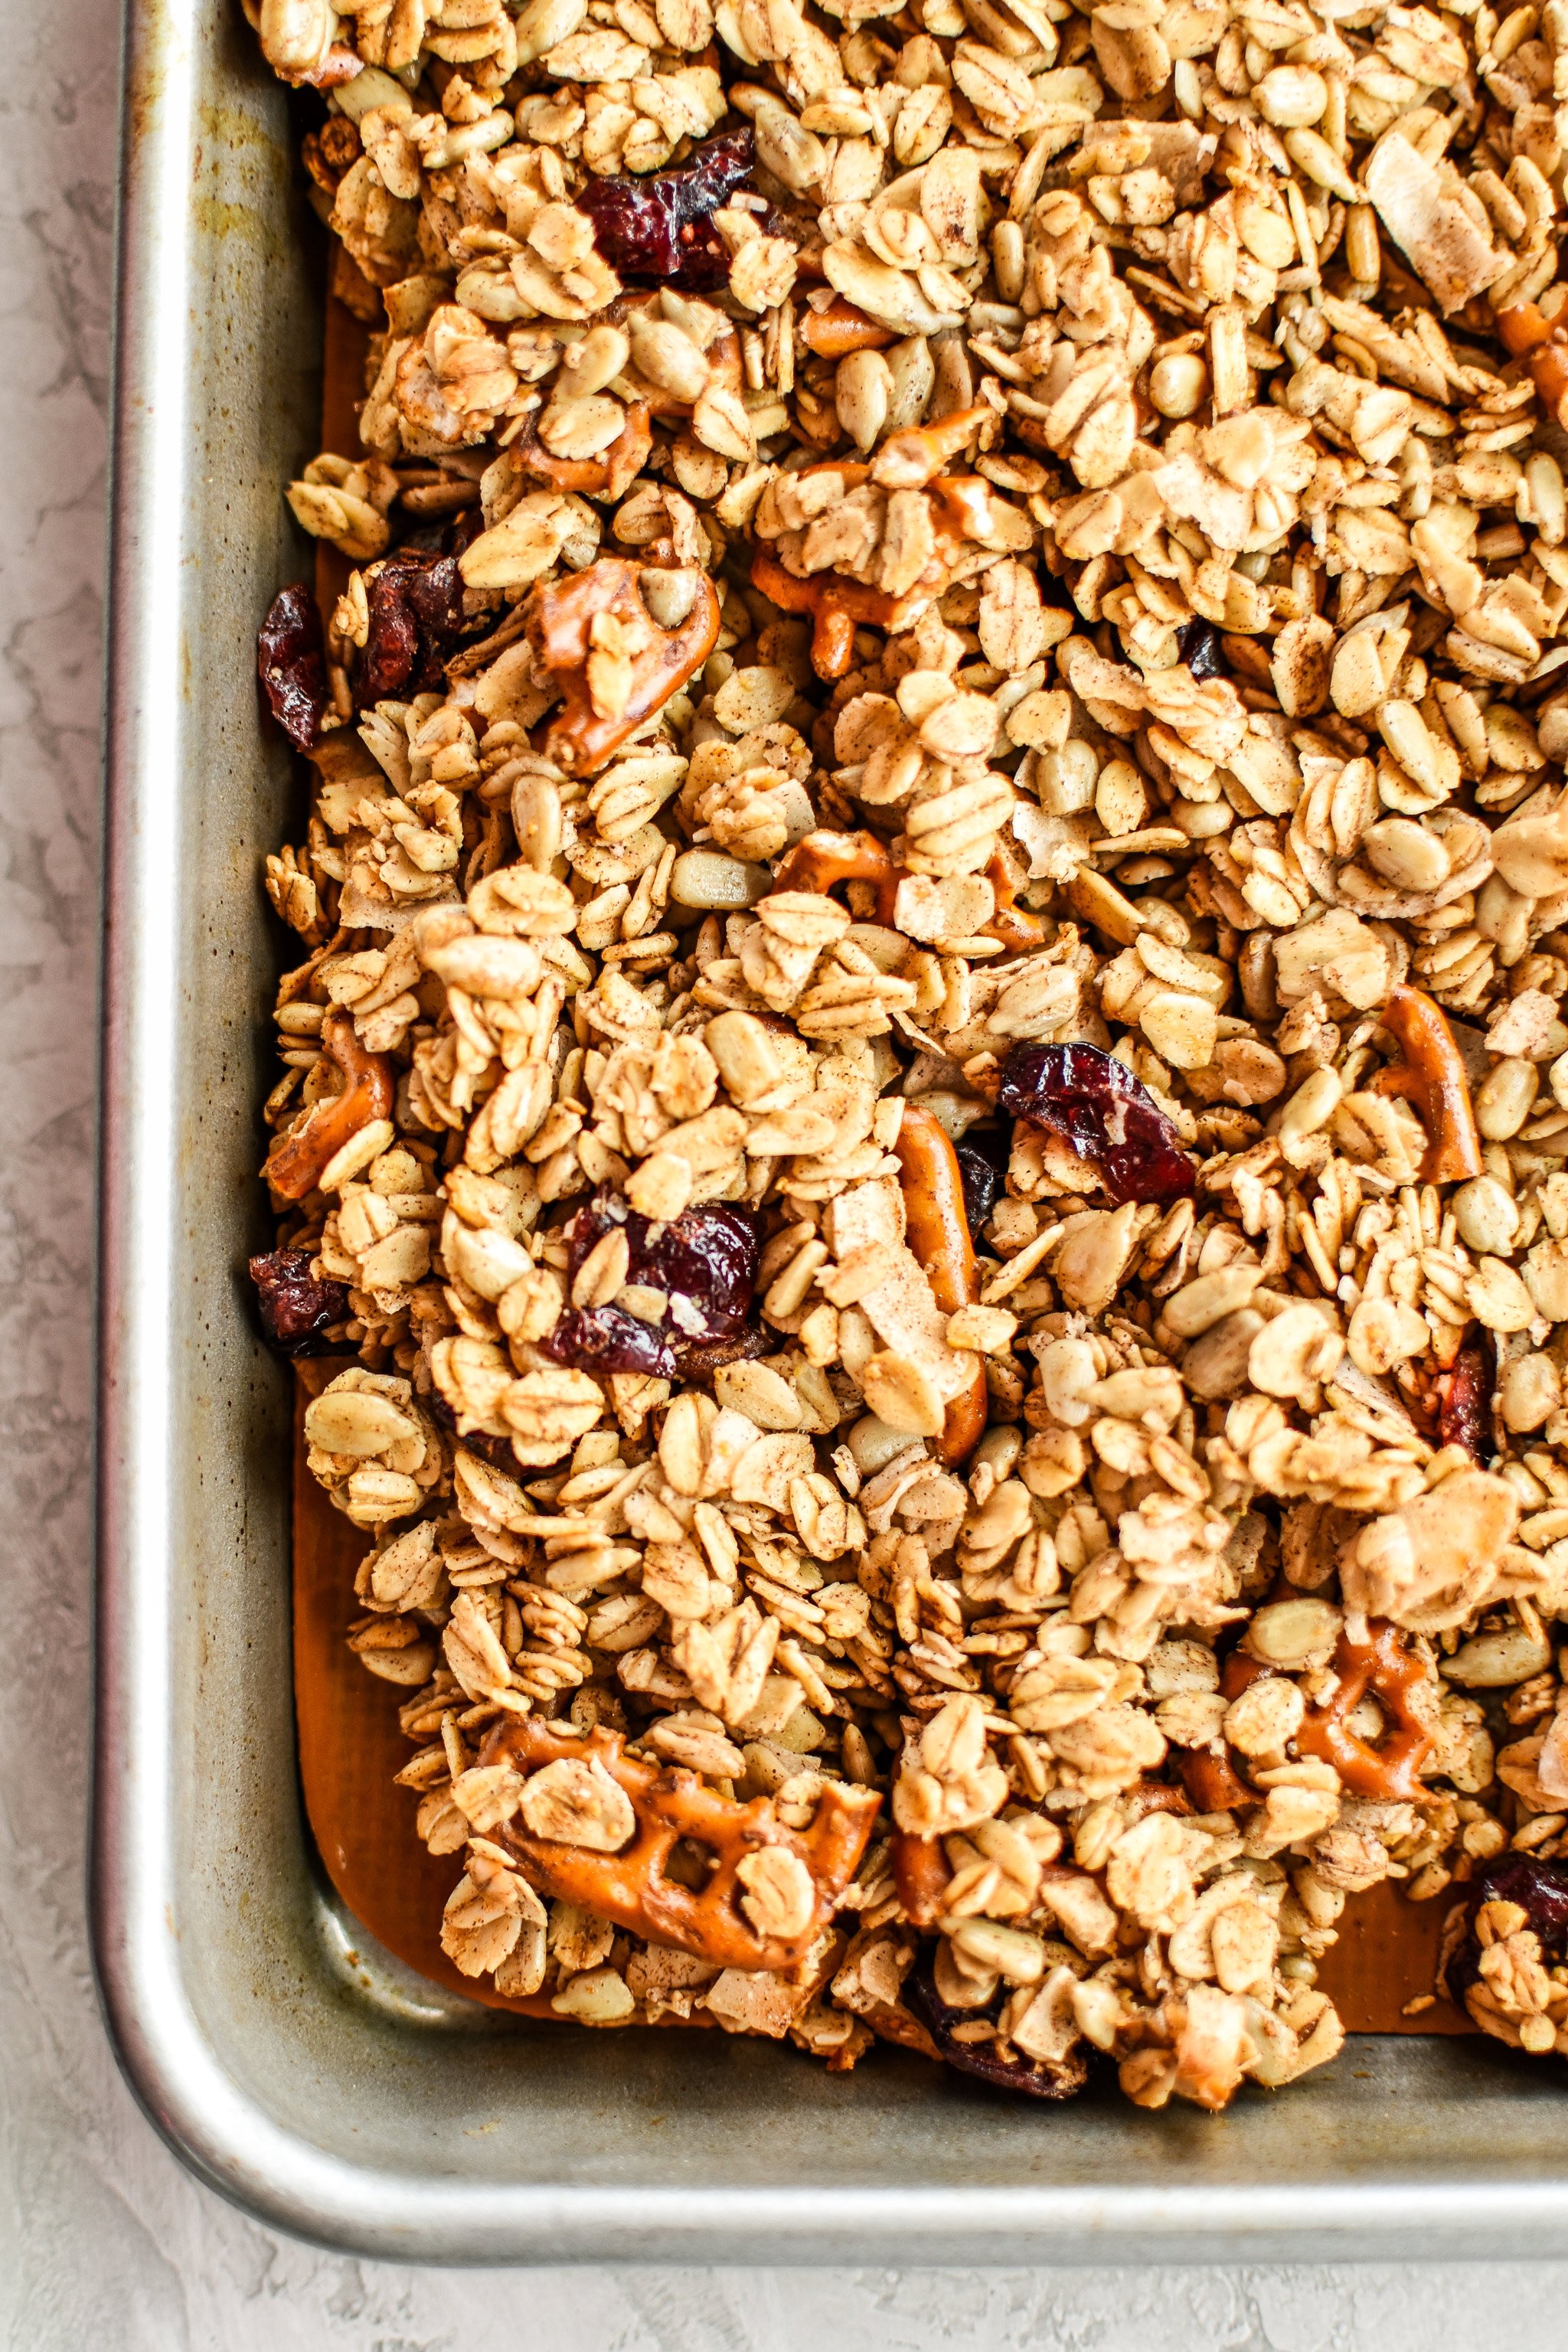 A sheet pan with cooked granola cooling.